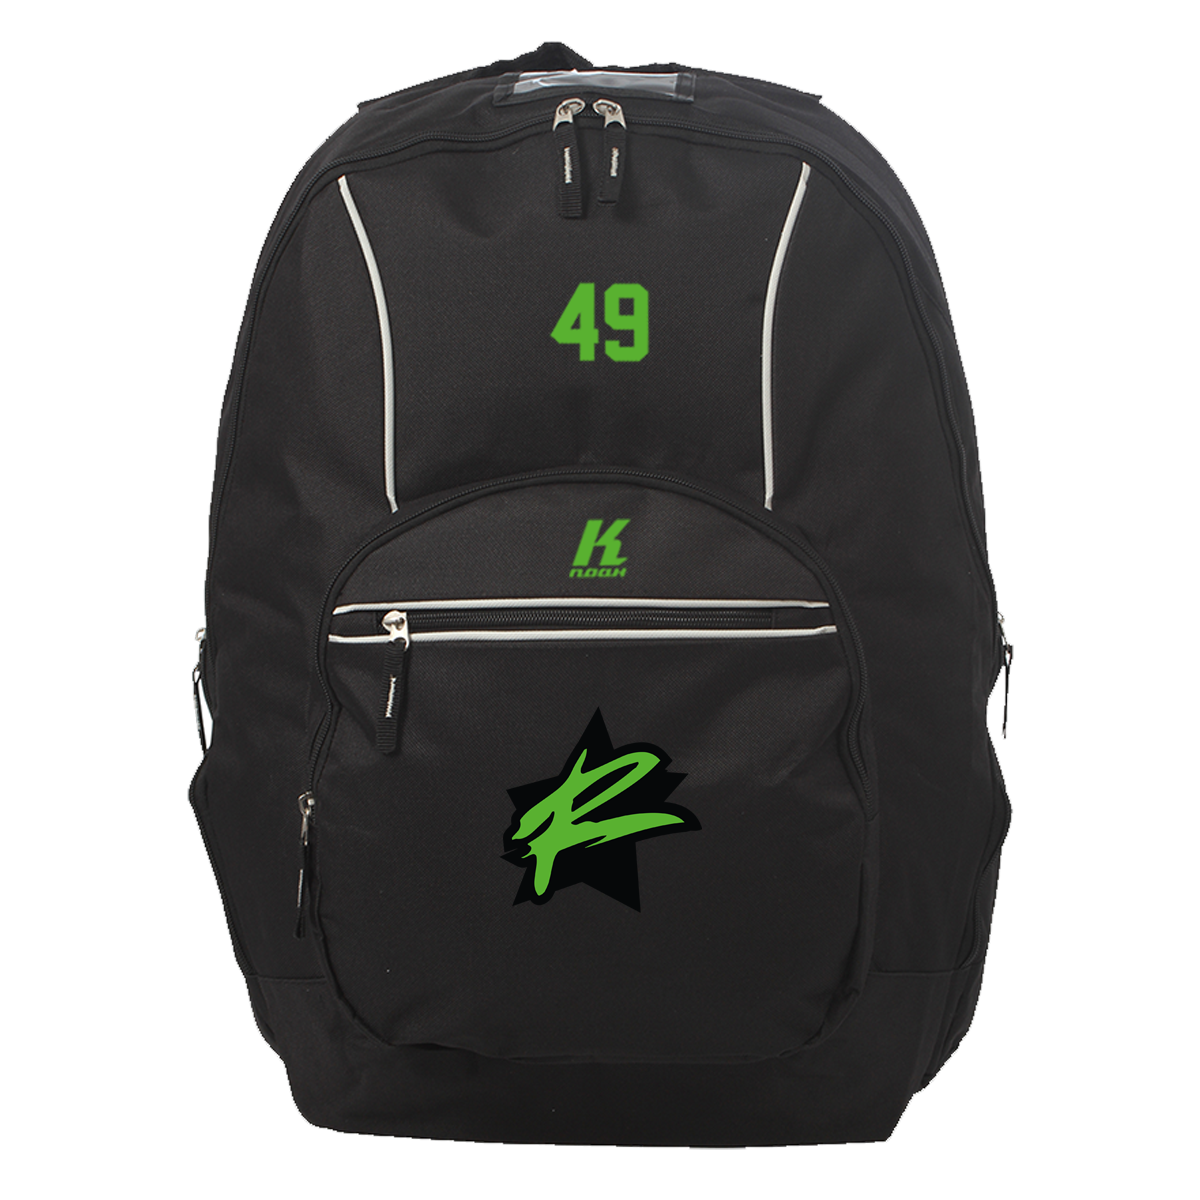 Rebels Heritage Backpack with Playernumber or Initials